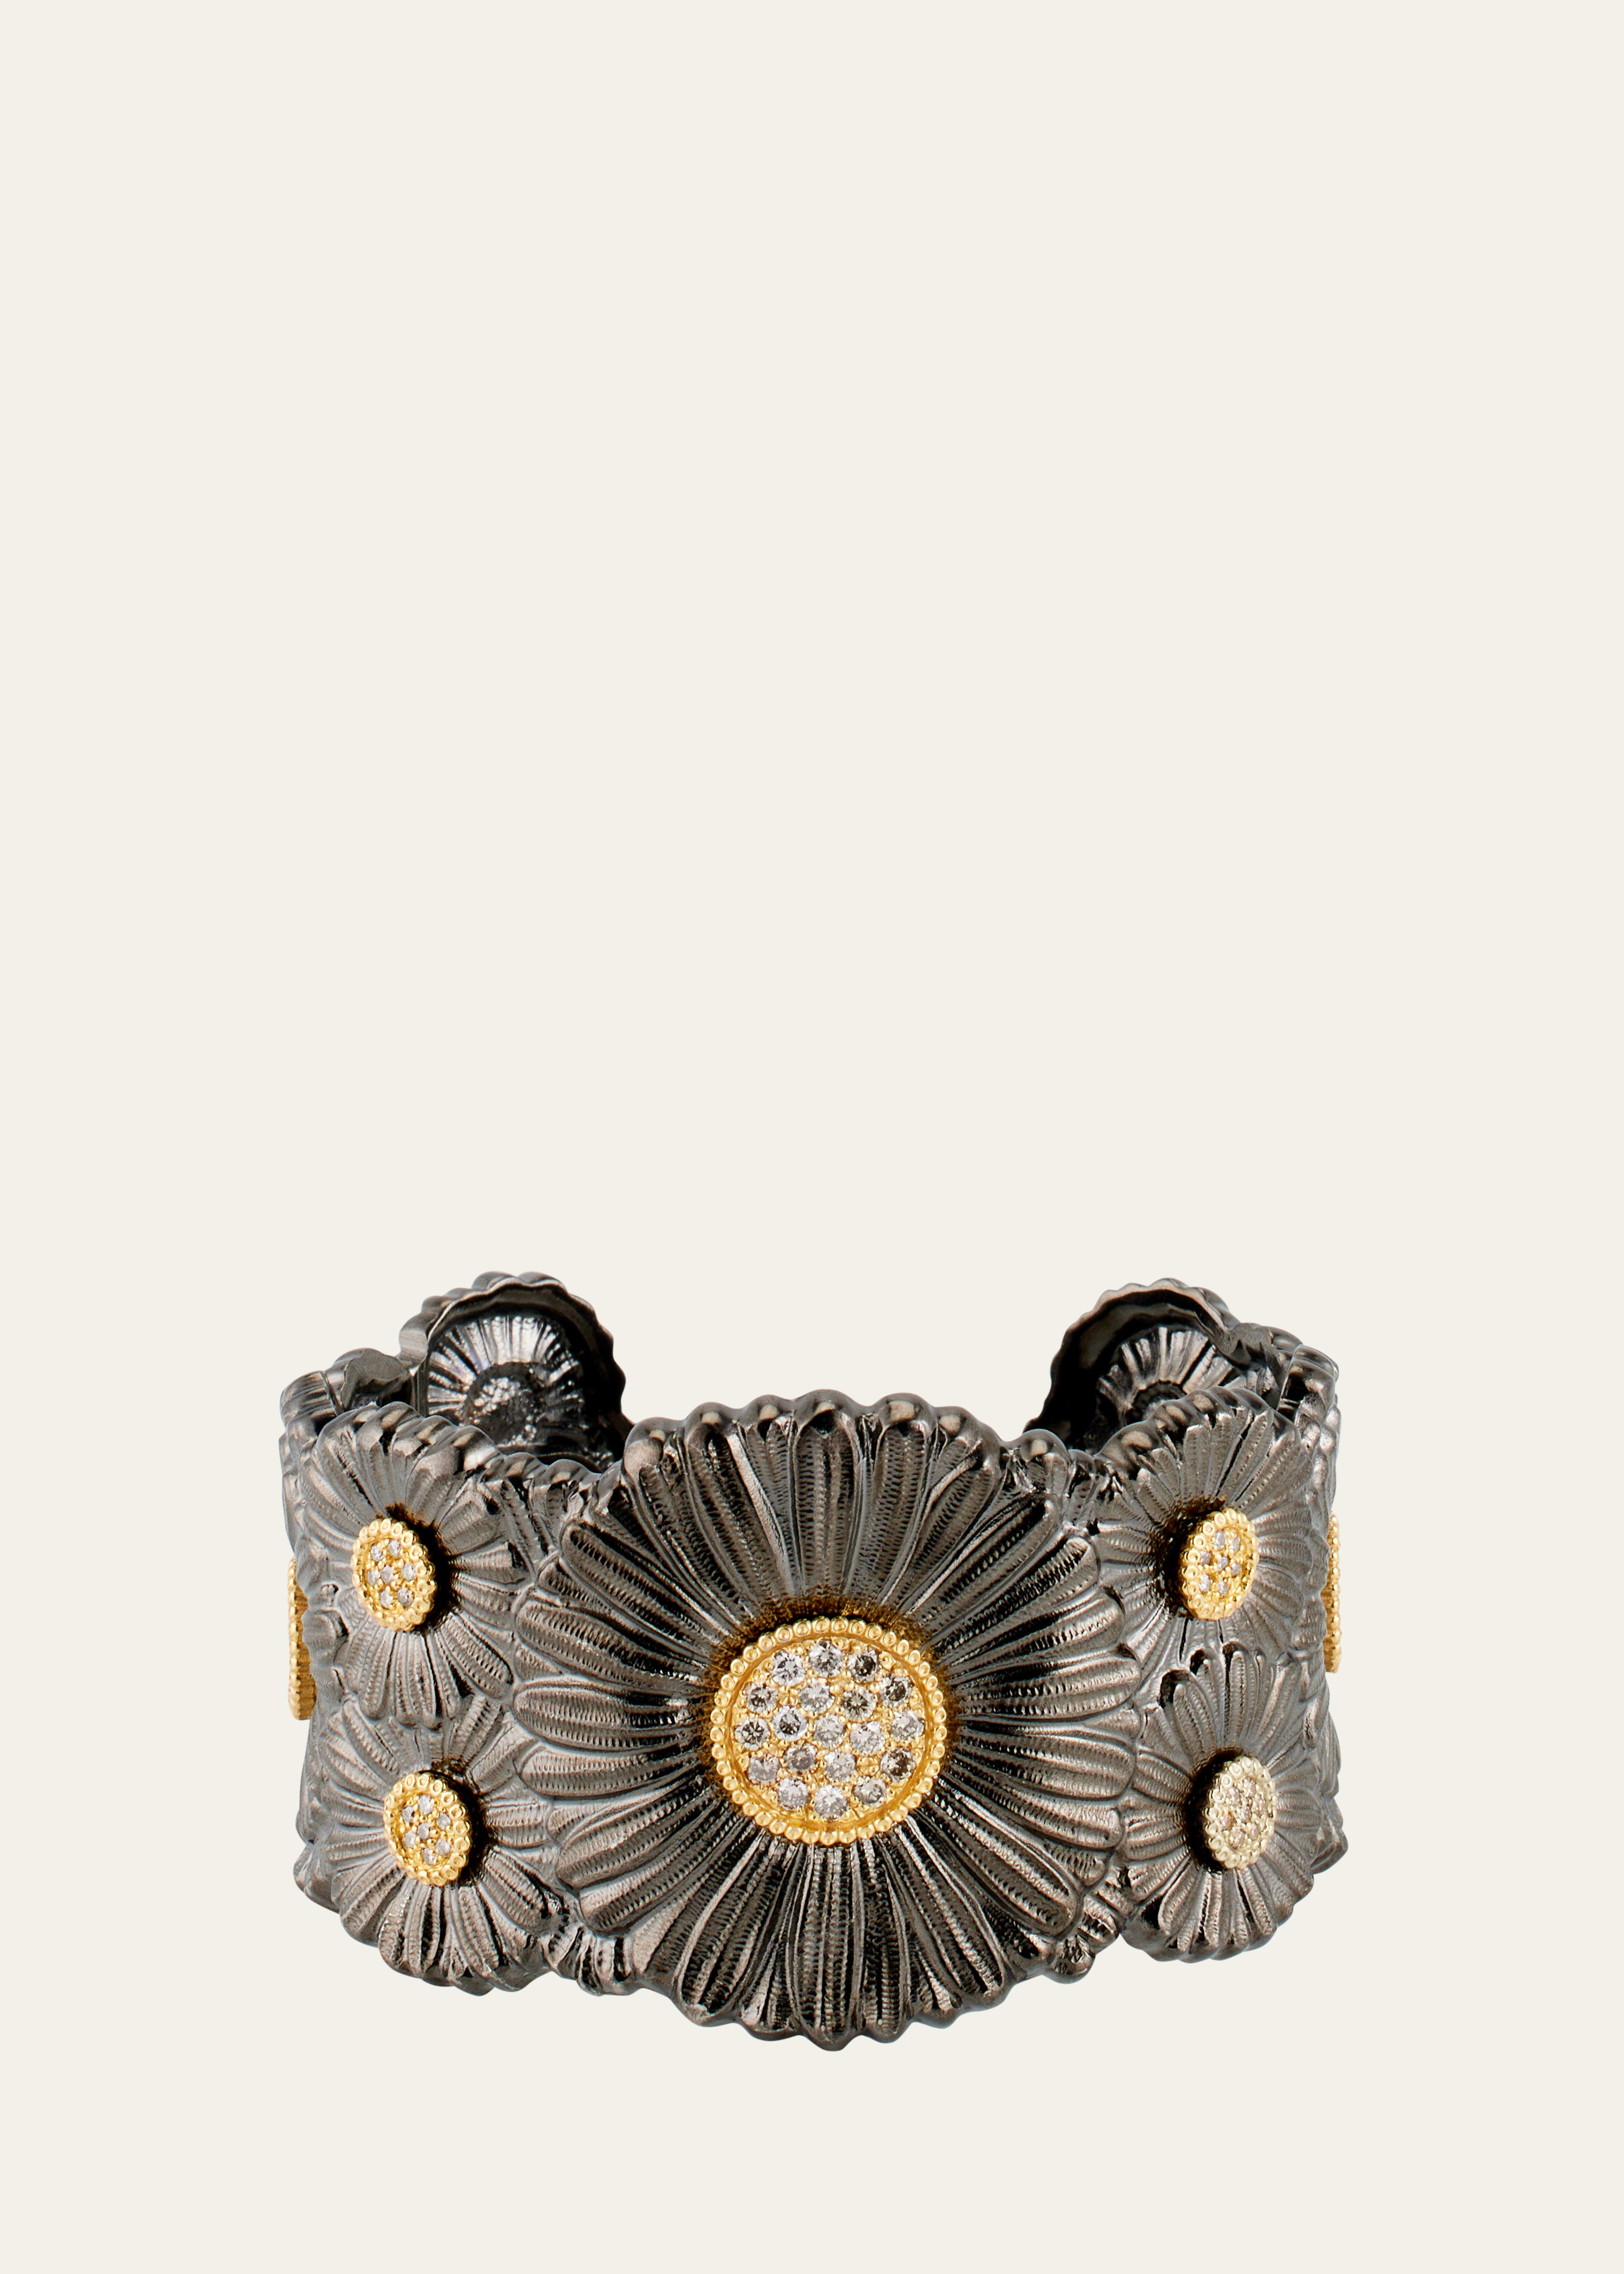 Buccellati Silver And 18k Gold Daisy Blossoms Bracelet With Diamonds